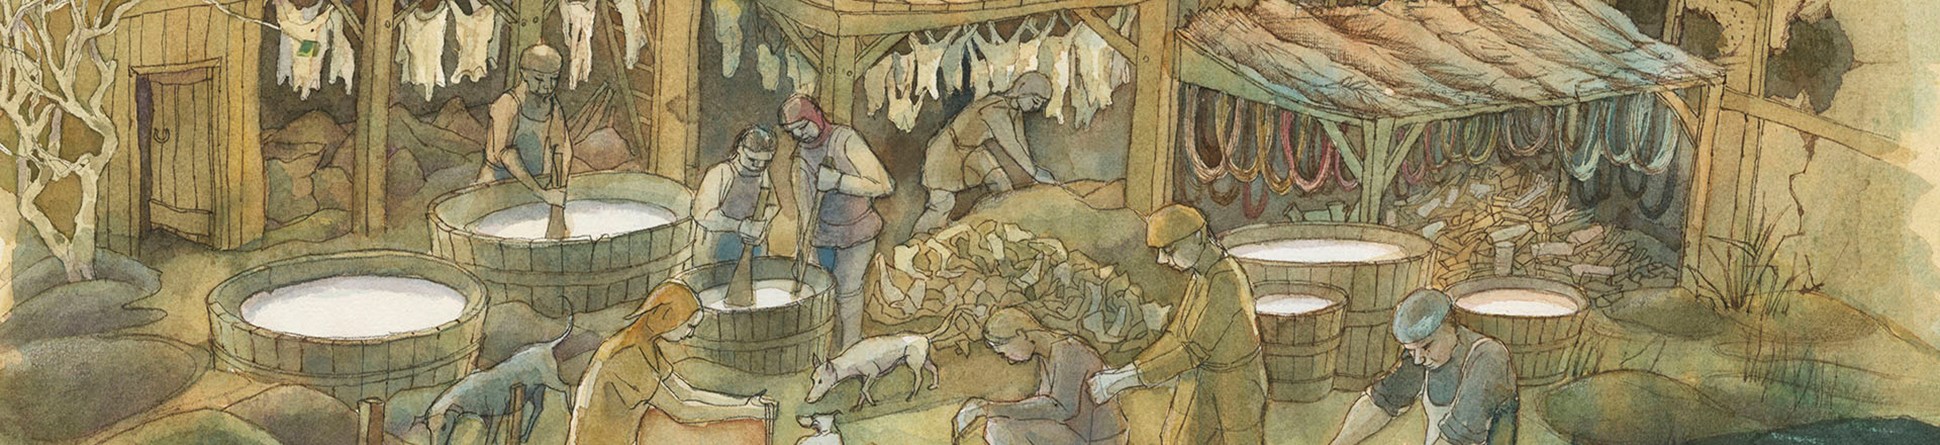 Reconstruction drawing of medieval tannery